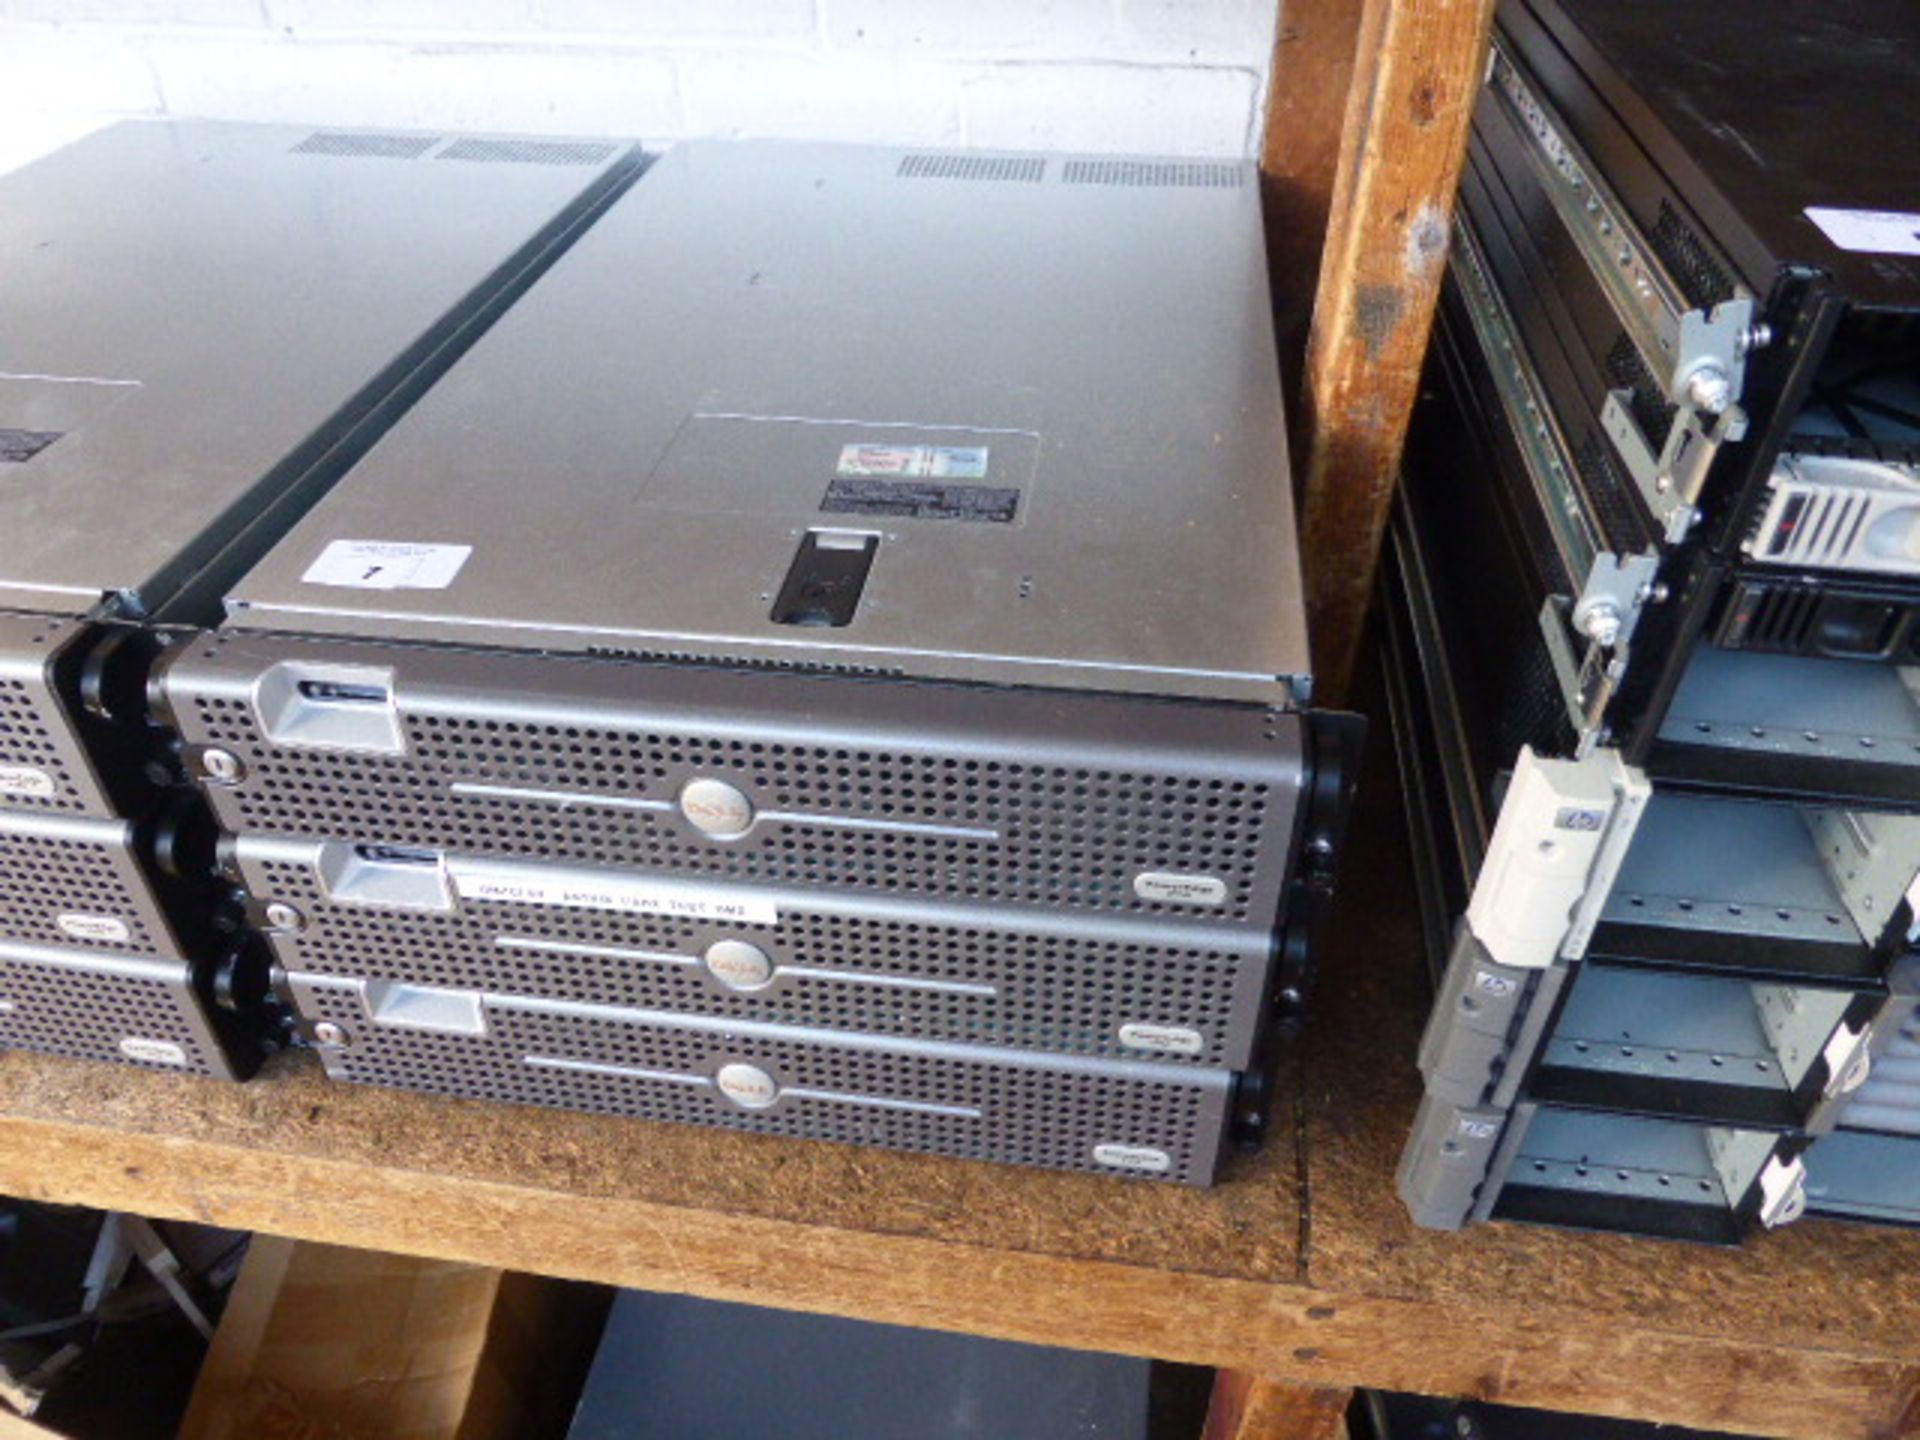 3 Dell PowerEdge 2950 rack mounted servers, no hard drives - Image 2 of 2